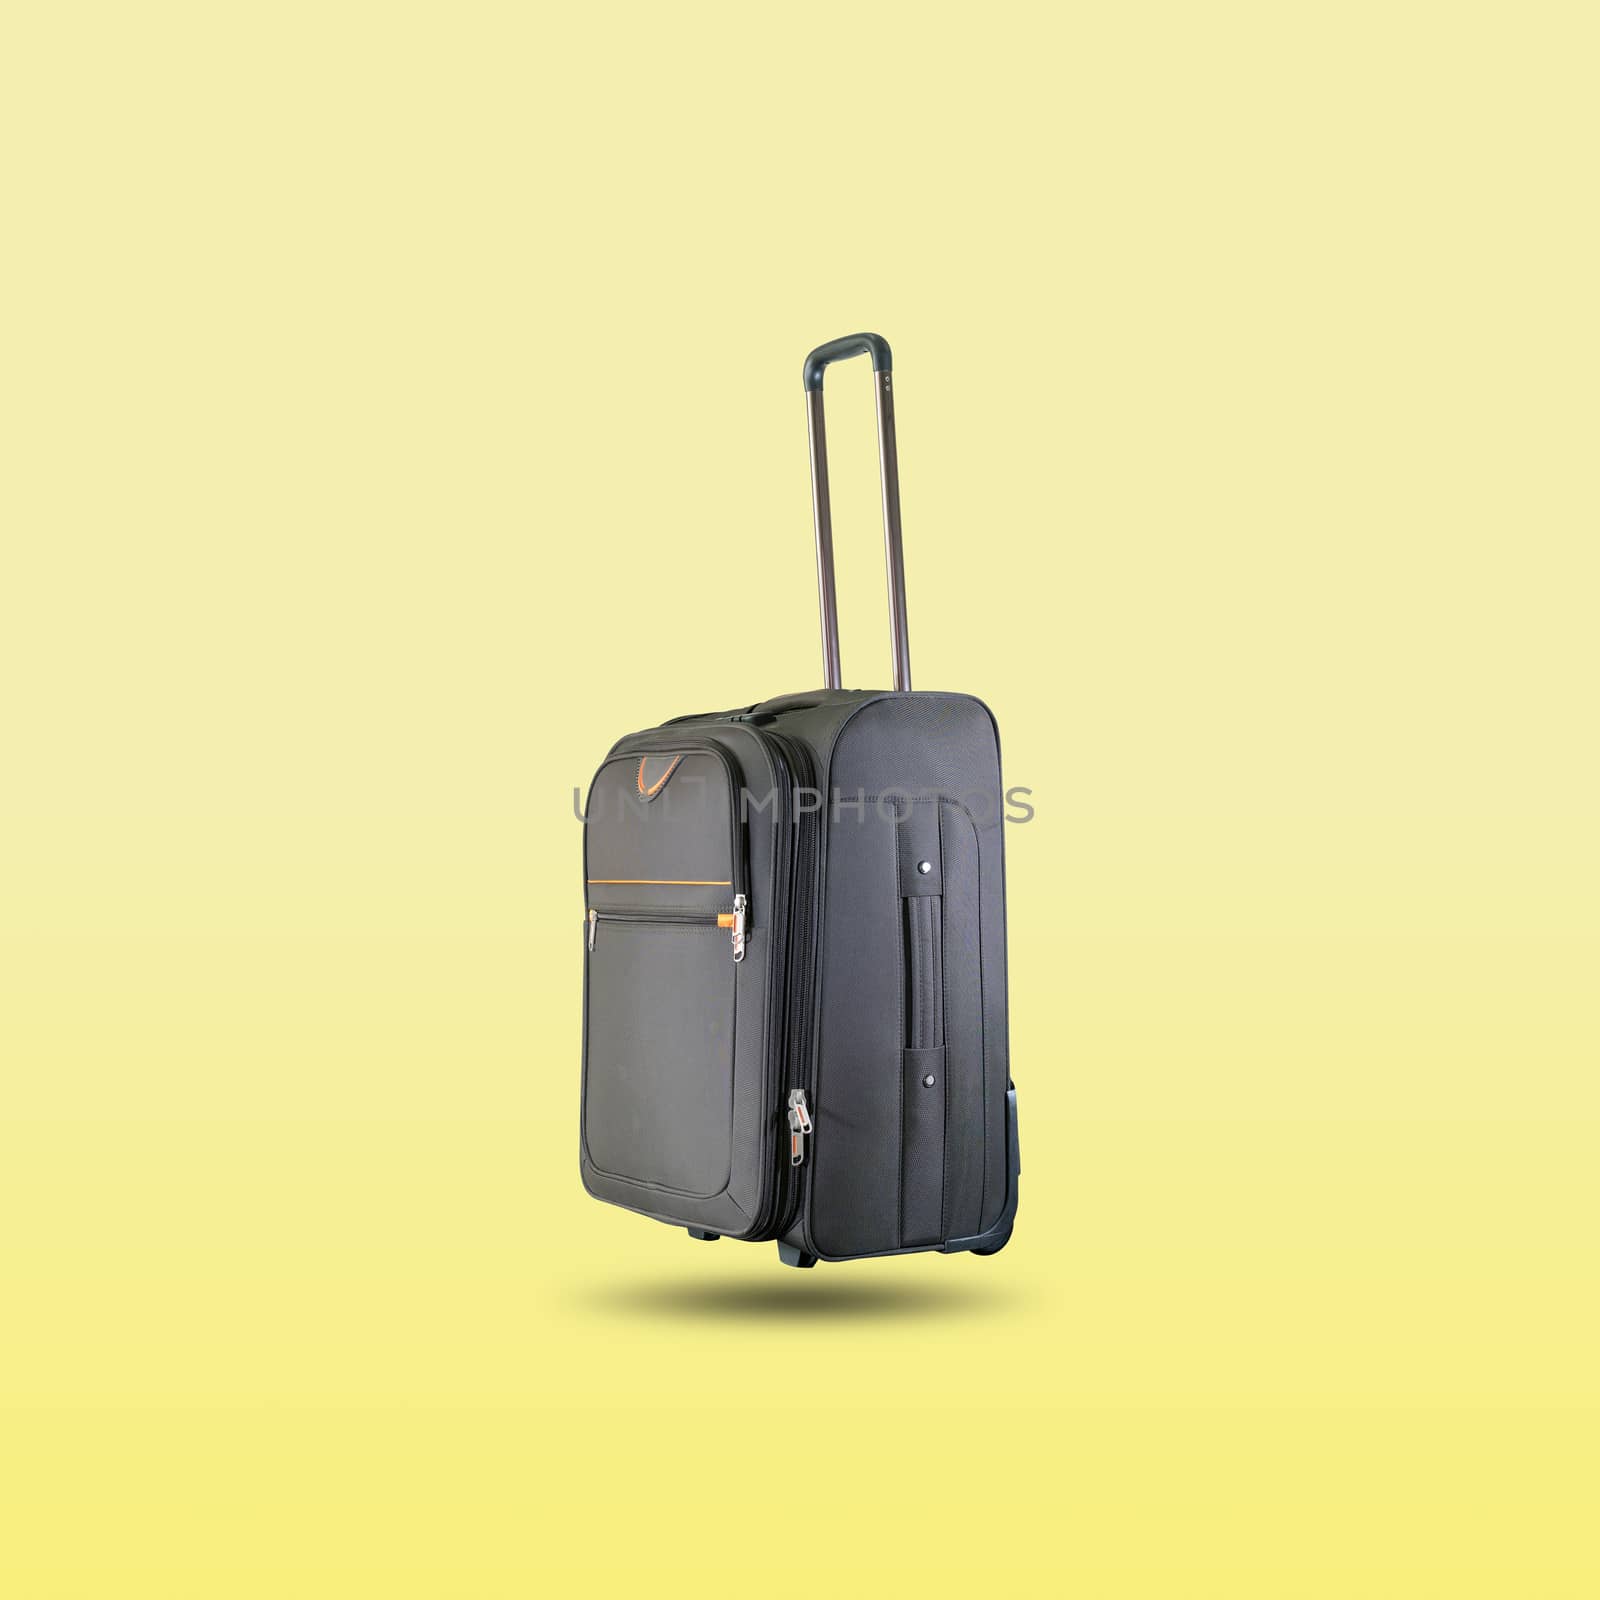 Black suitcase isolated on beautiful pastel color background by wattanaphob